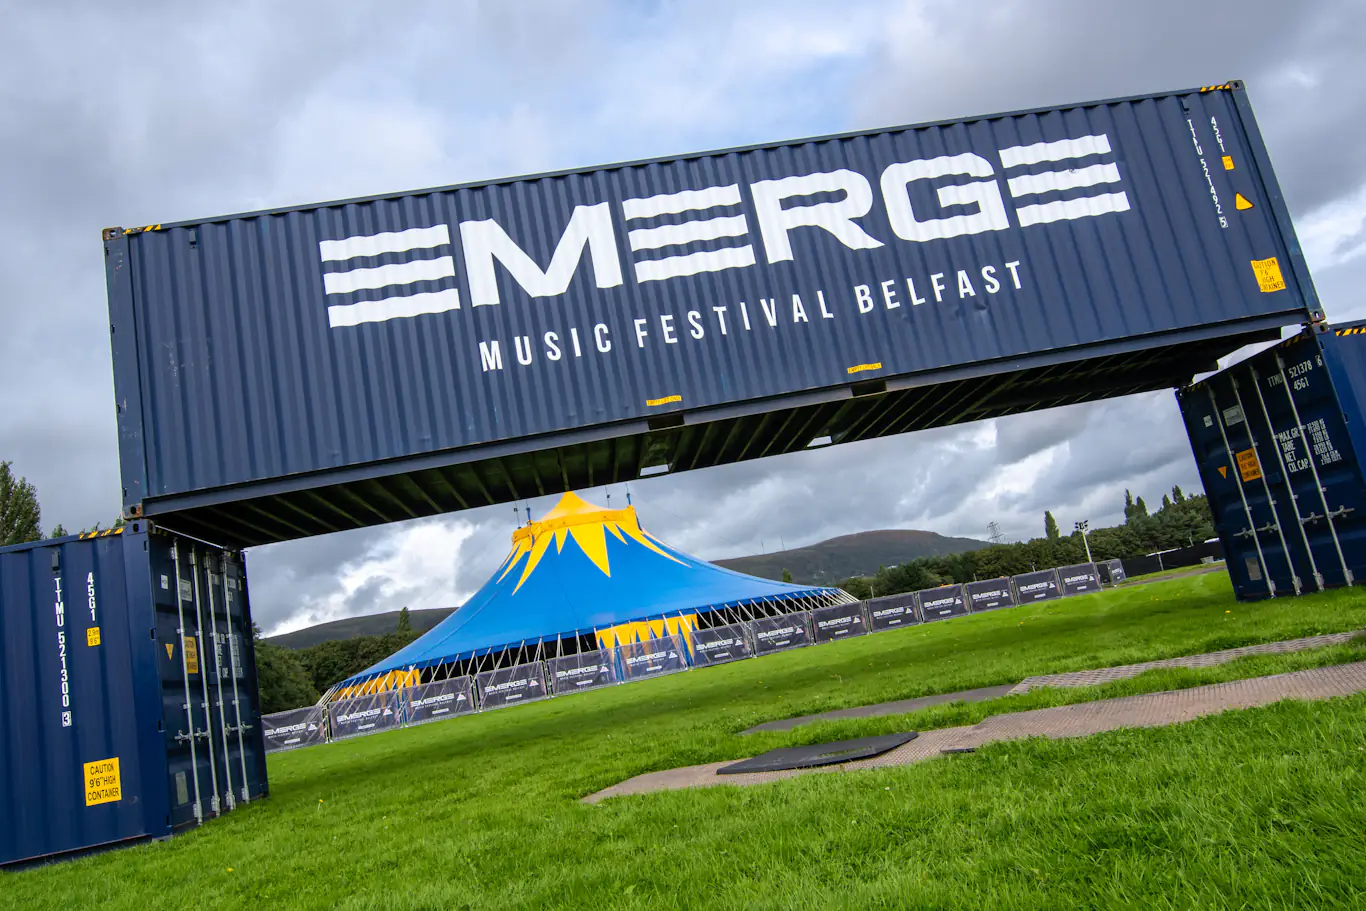 EMERGE MUSIC FESTIVAL – Ireland’s biggest Electronic Music Festival, is back this weekend